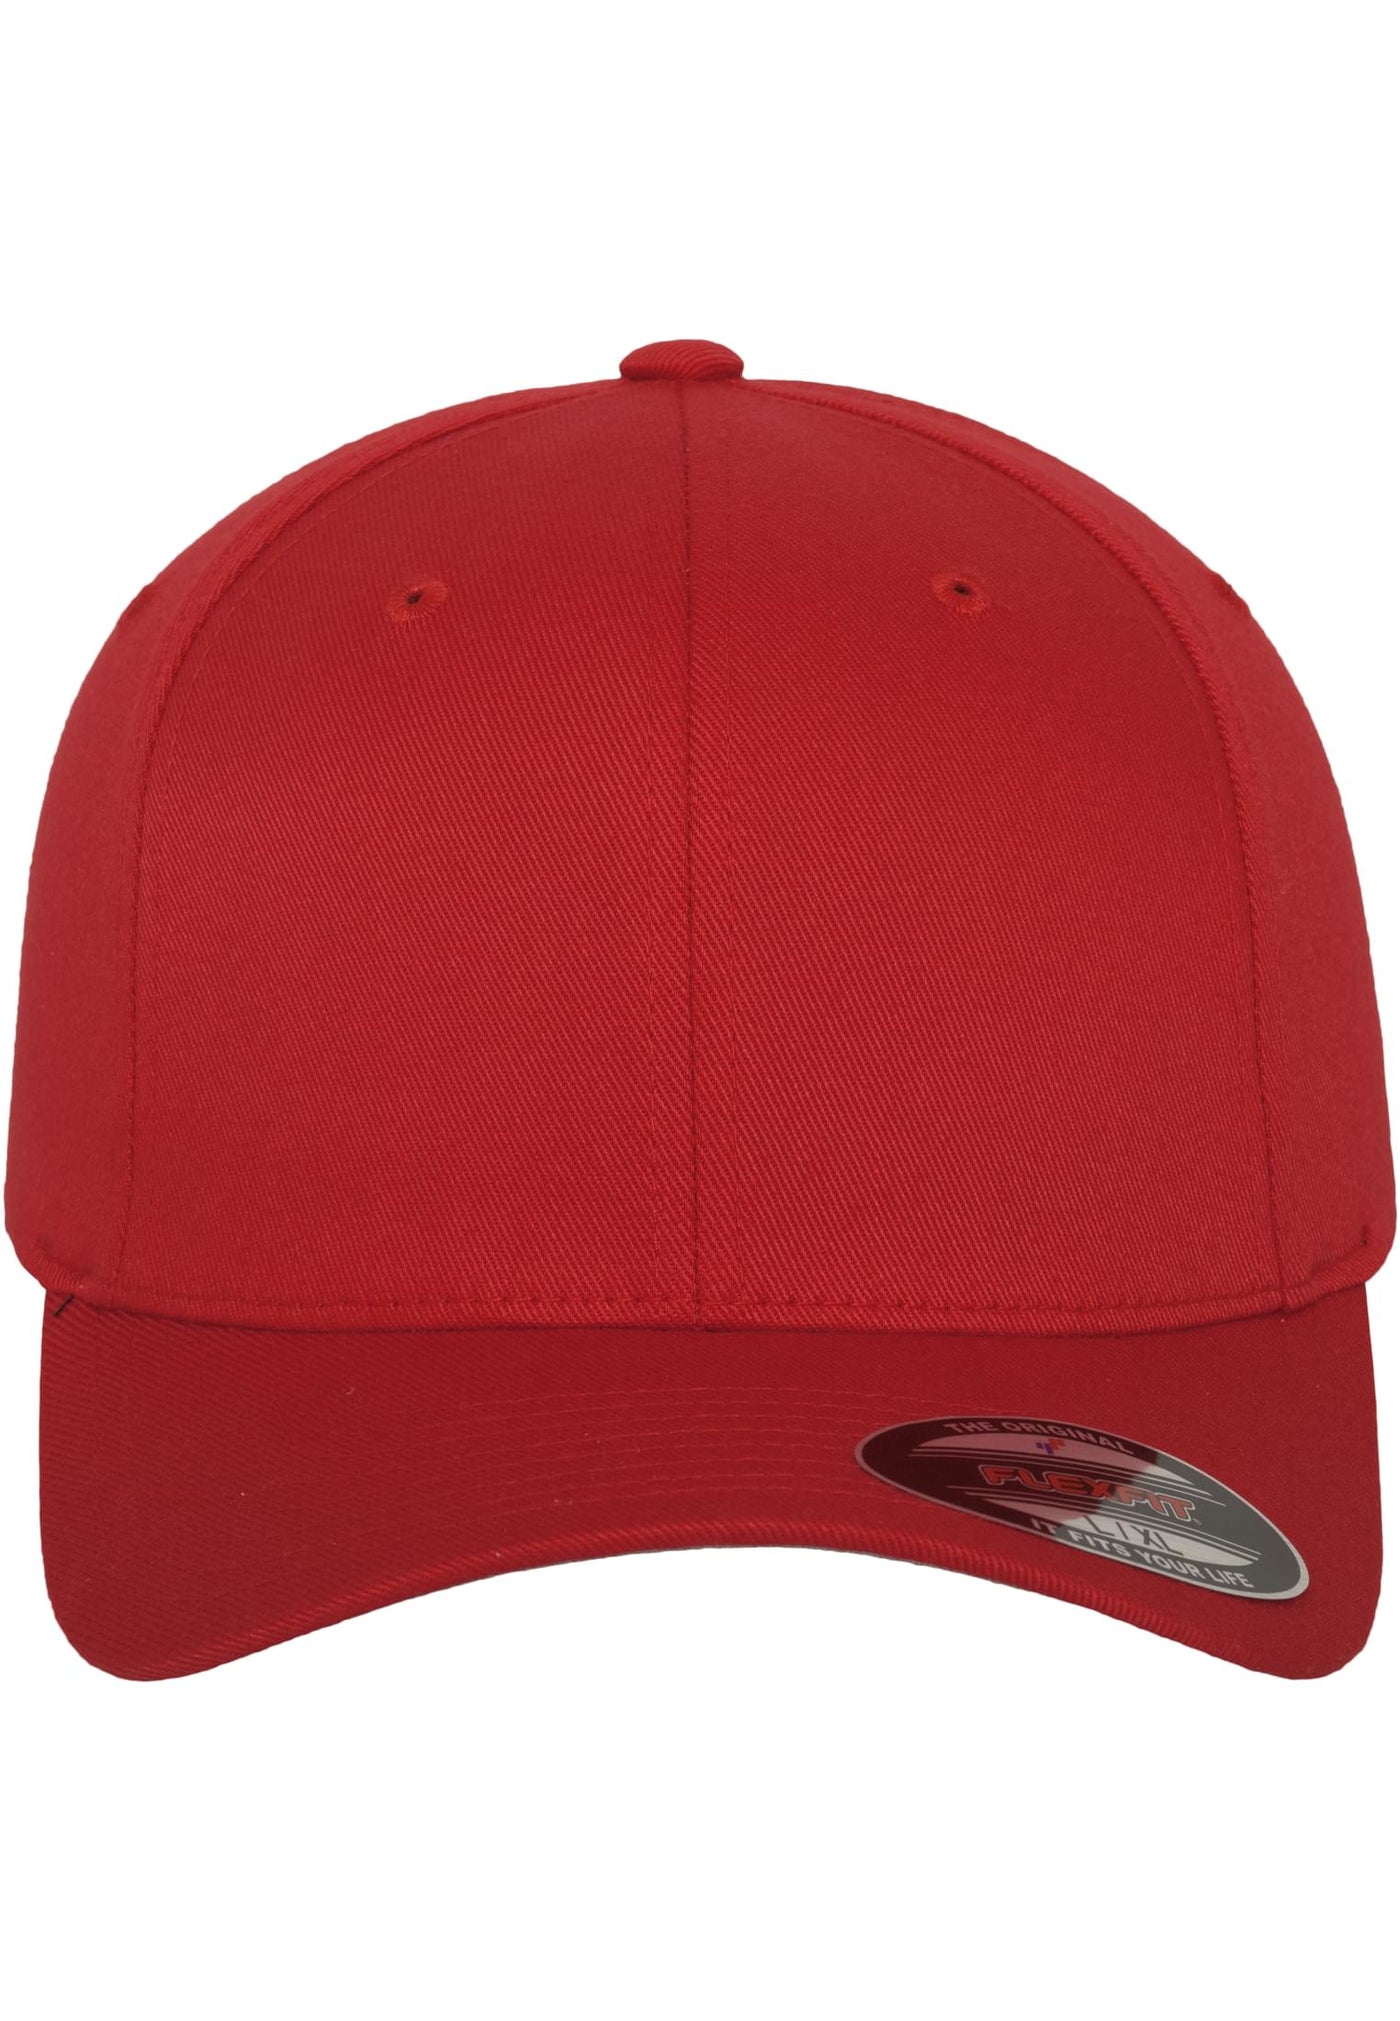 Flexfit Wooly Combed 6277 Cap - RED